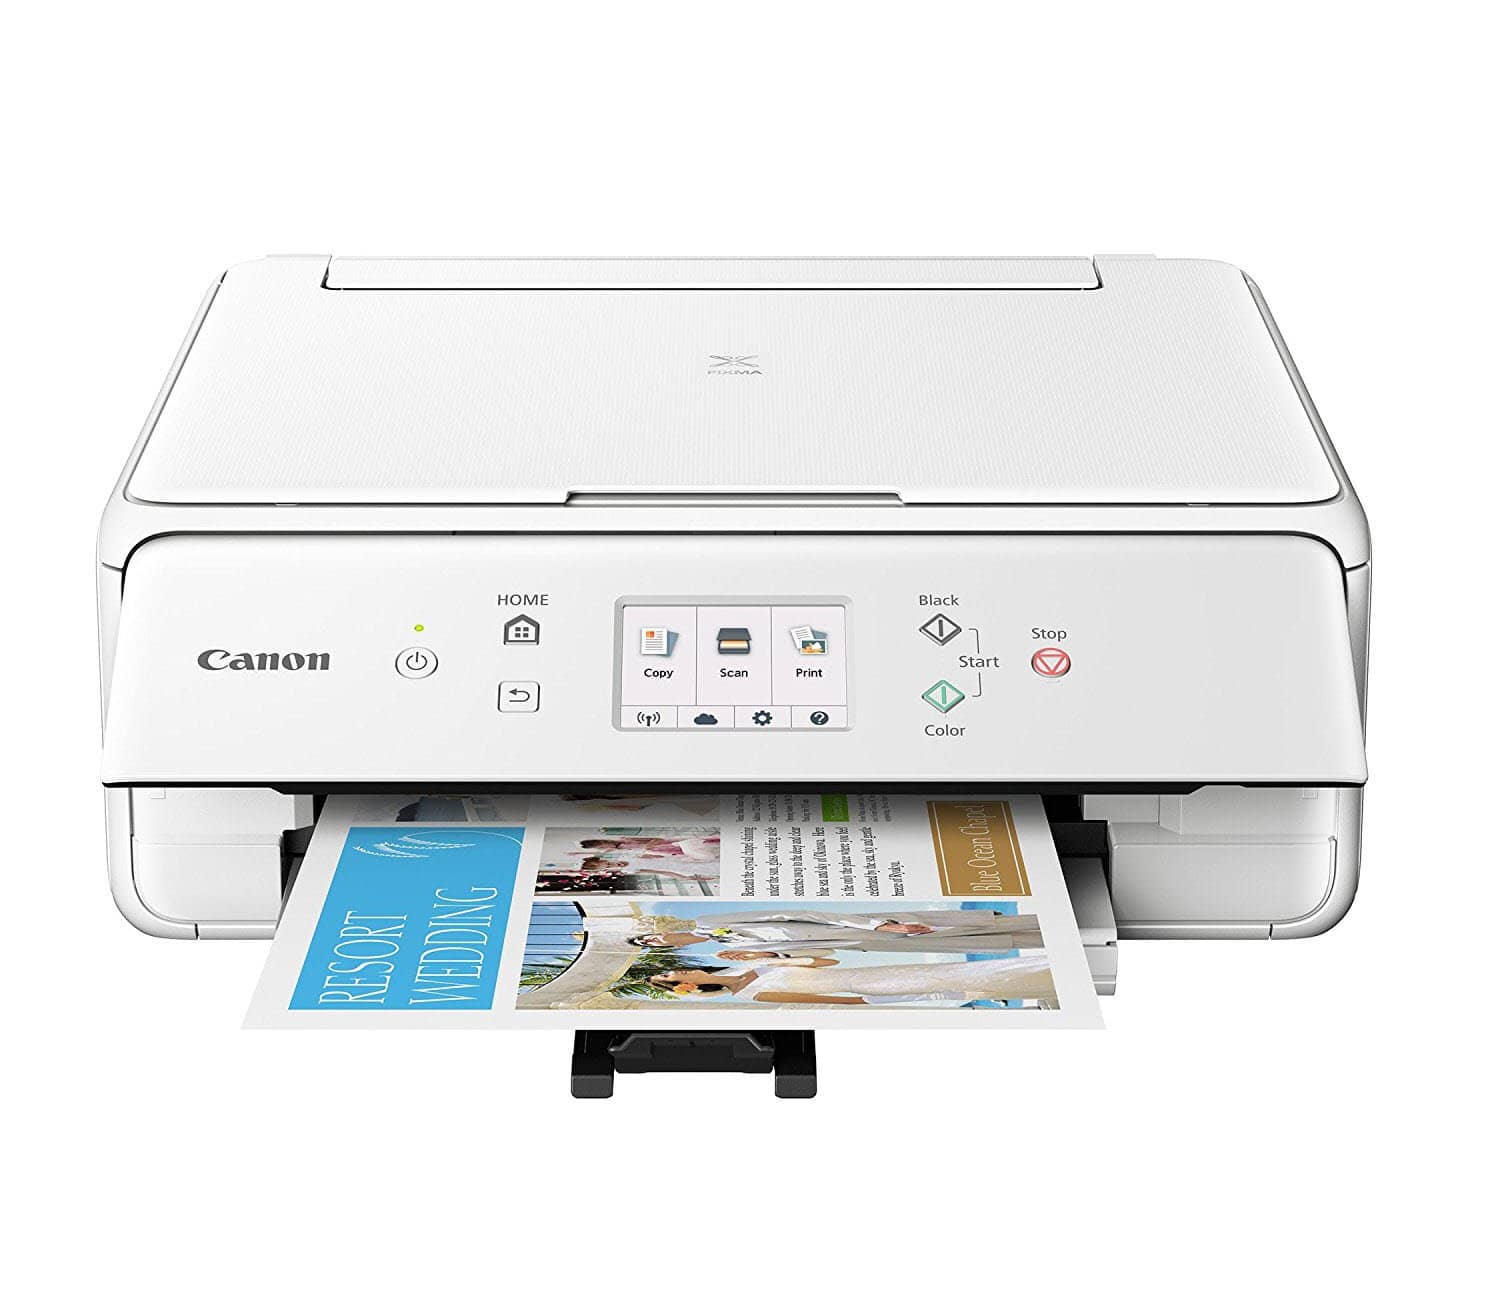 Canon 2229C022 Wireless All-In-One Printer with Scanner and Copier Ink Bundle - White